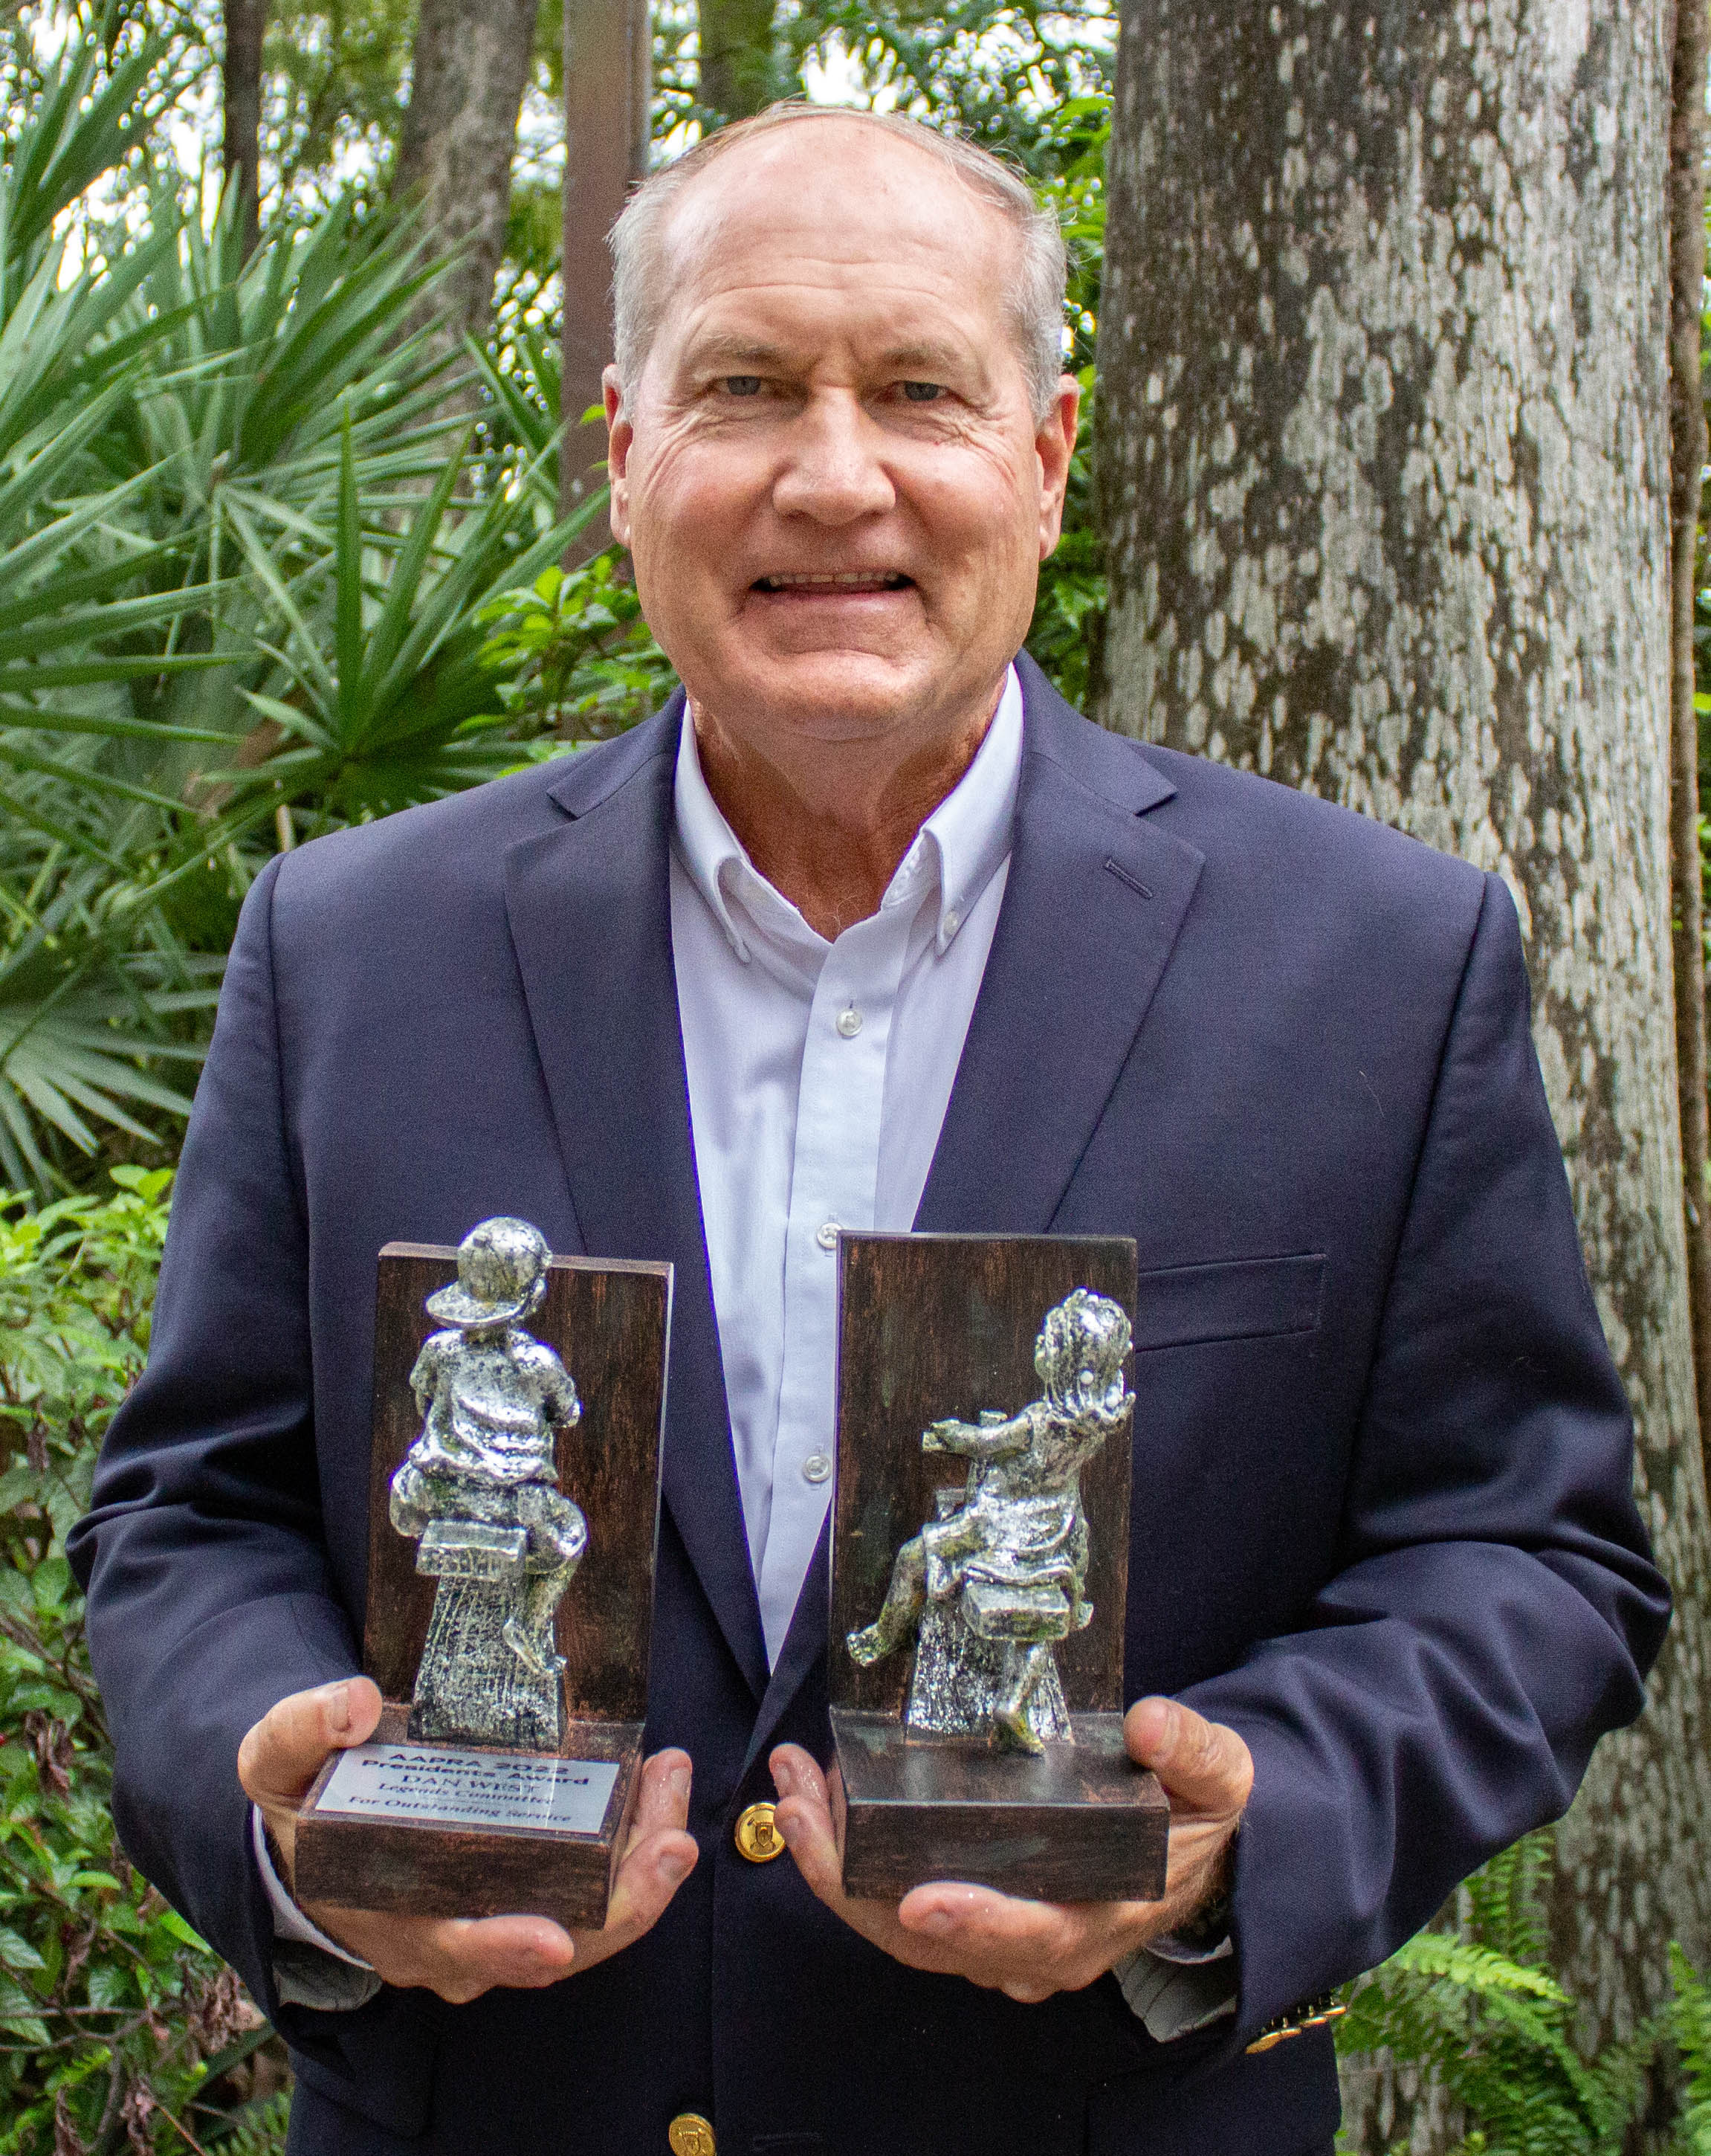 Broward Parks Director Dan West recognized by national parks professionals